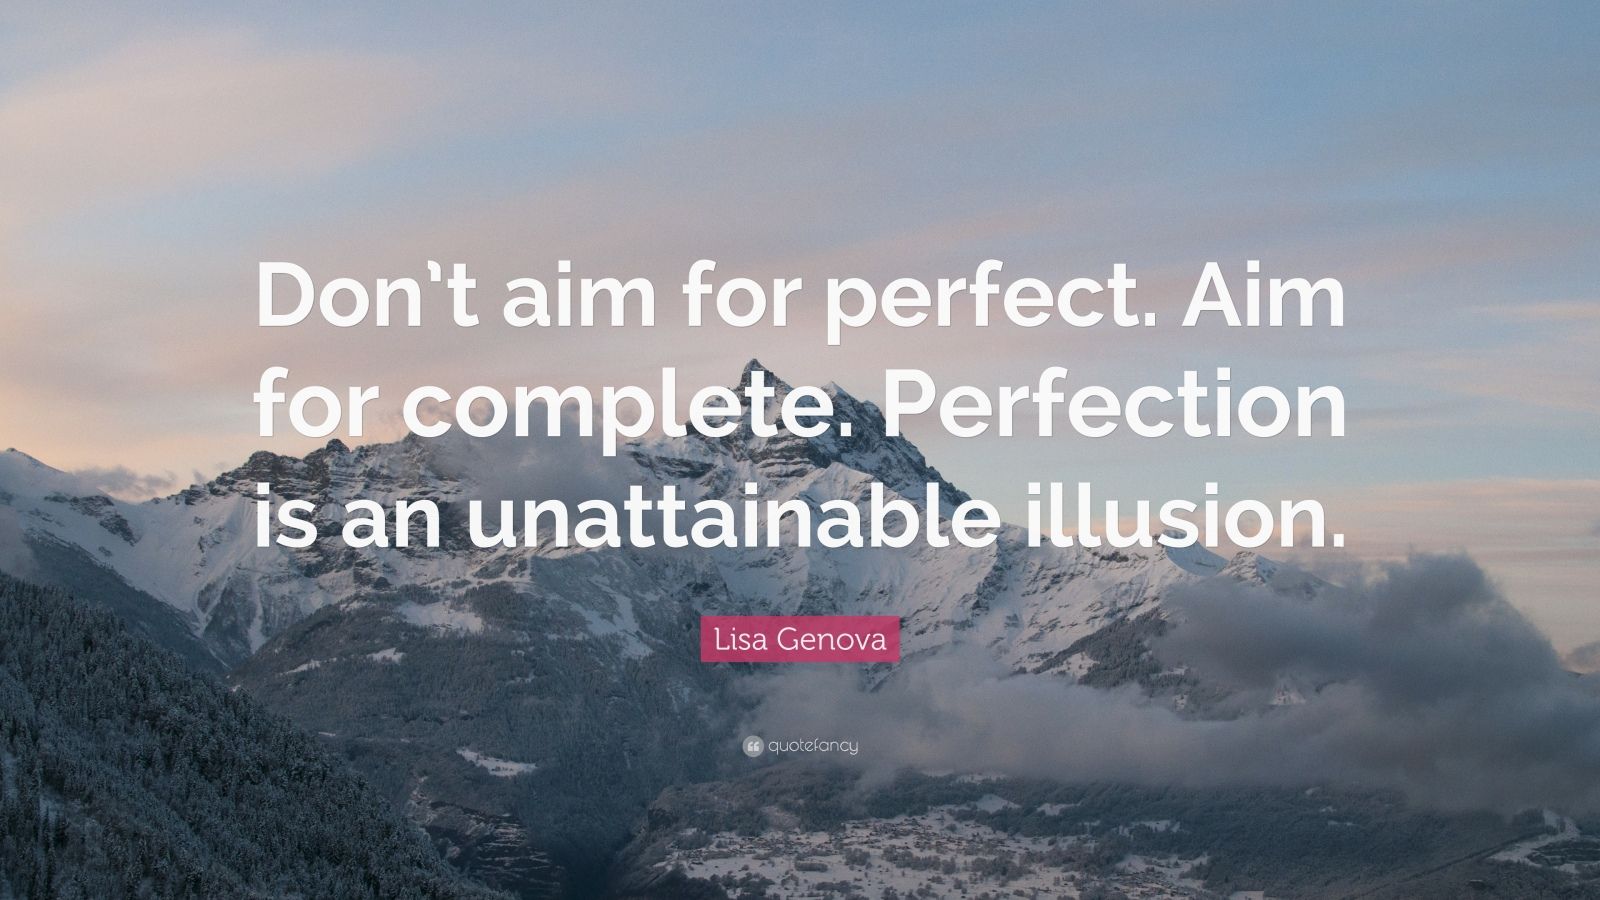 Lisa Genova Quote: “Don’t aim for perfect. Aim for complete. Perfection ...